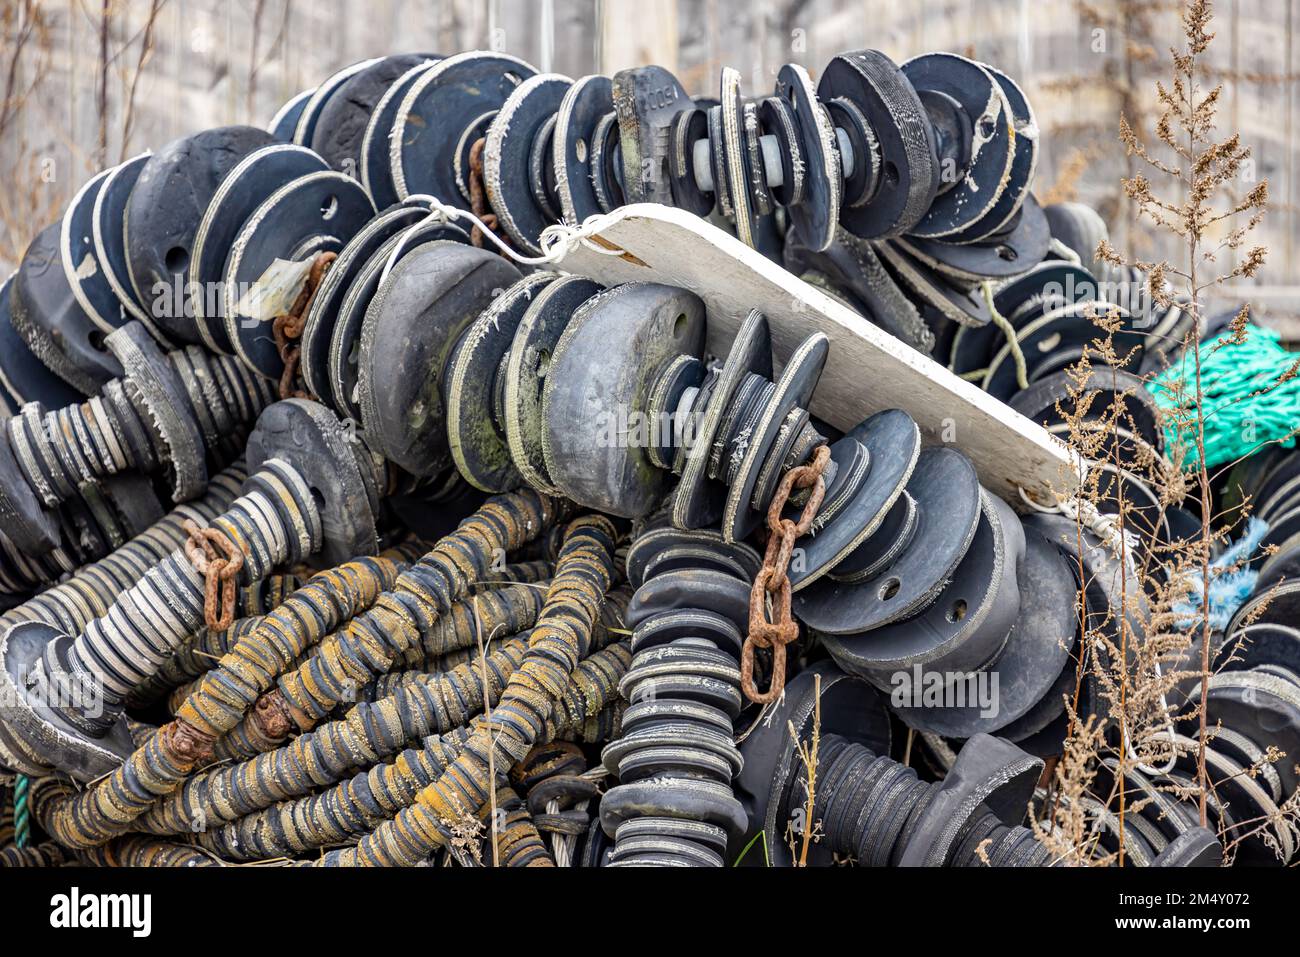 detail image of a pile of commerical fishing nets in Montauk, NY Stock Photo